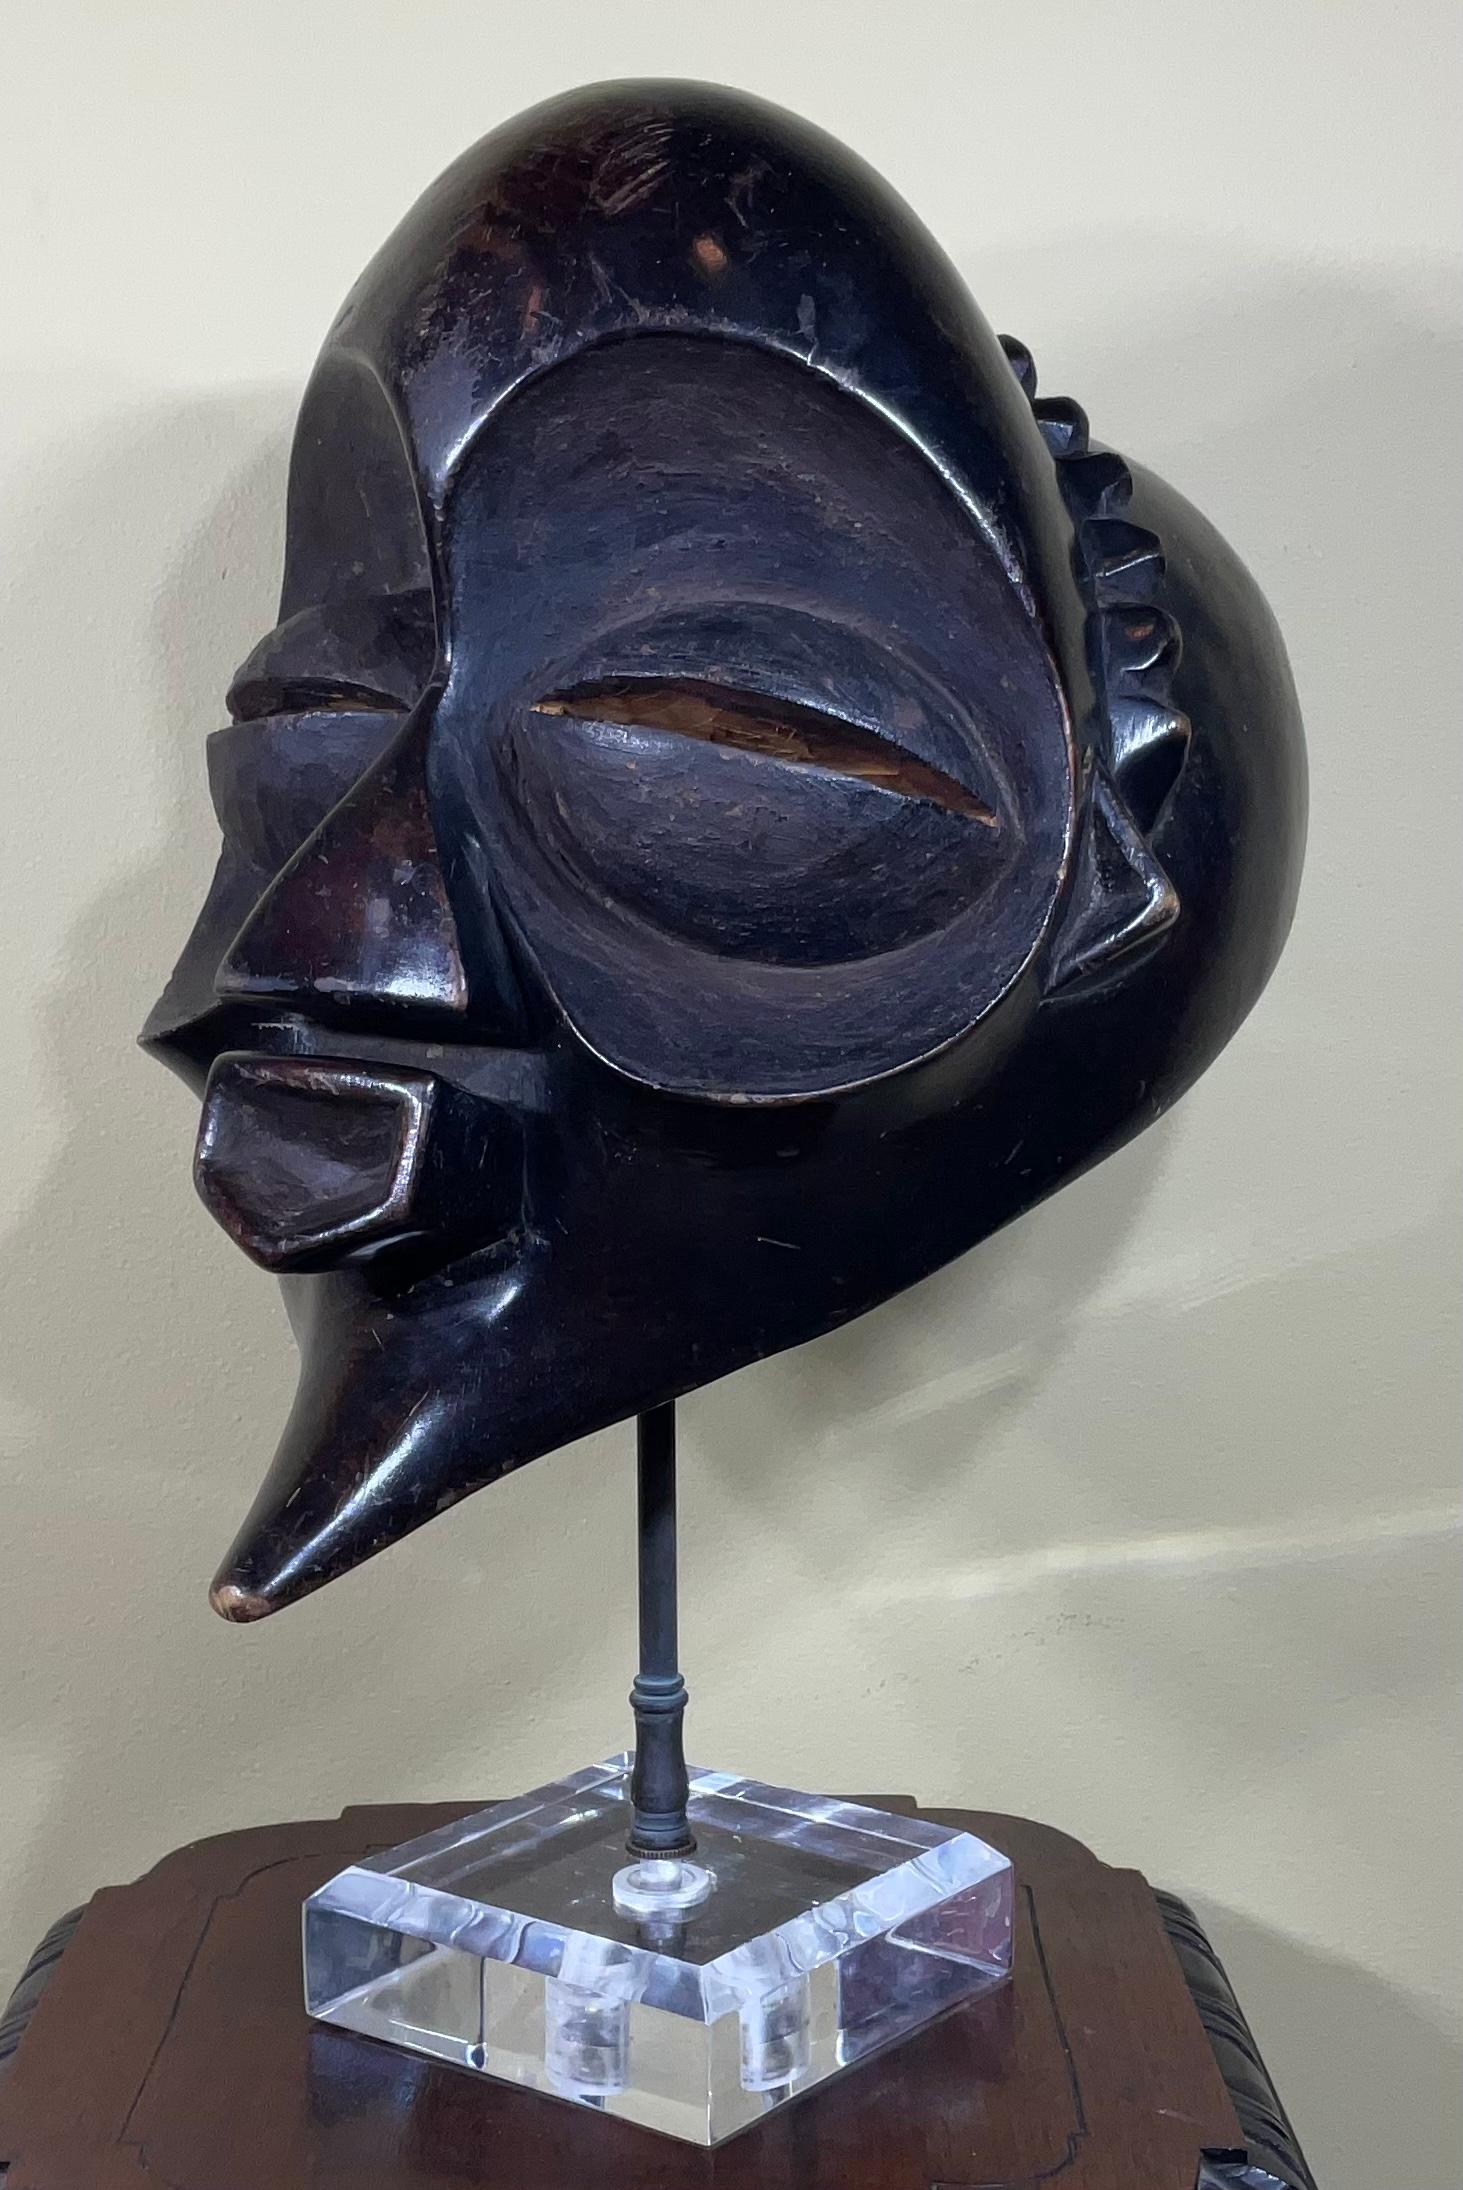 Exceptional hand carved wood mask with graphic elements, made of a single piece of wood and was made for decorative purposes. Very intriguing and mysterious face.
The mask in mounted on custom made lucite base.
Size without base is: 11”wide x